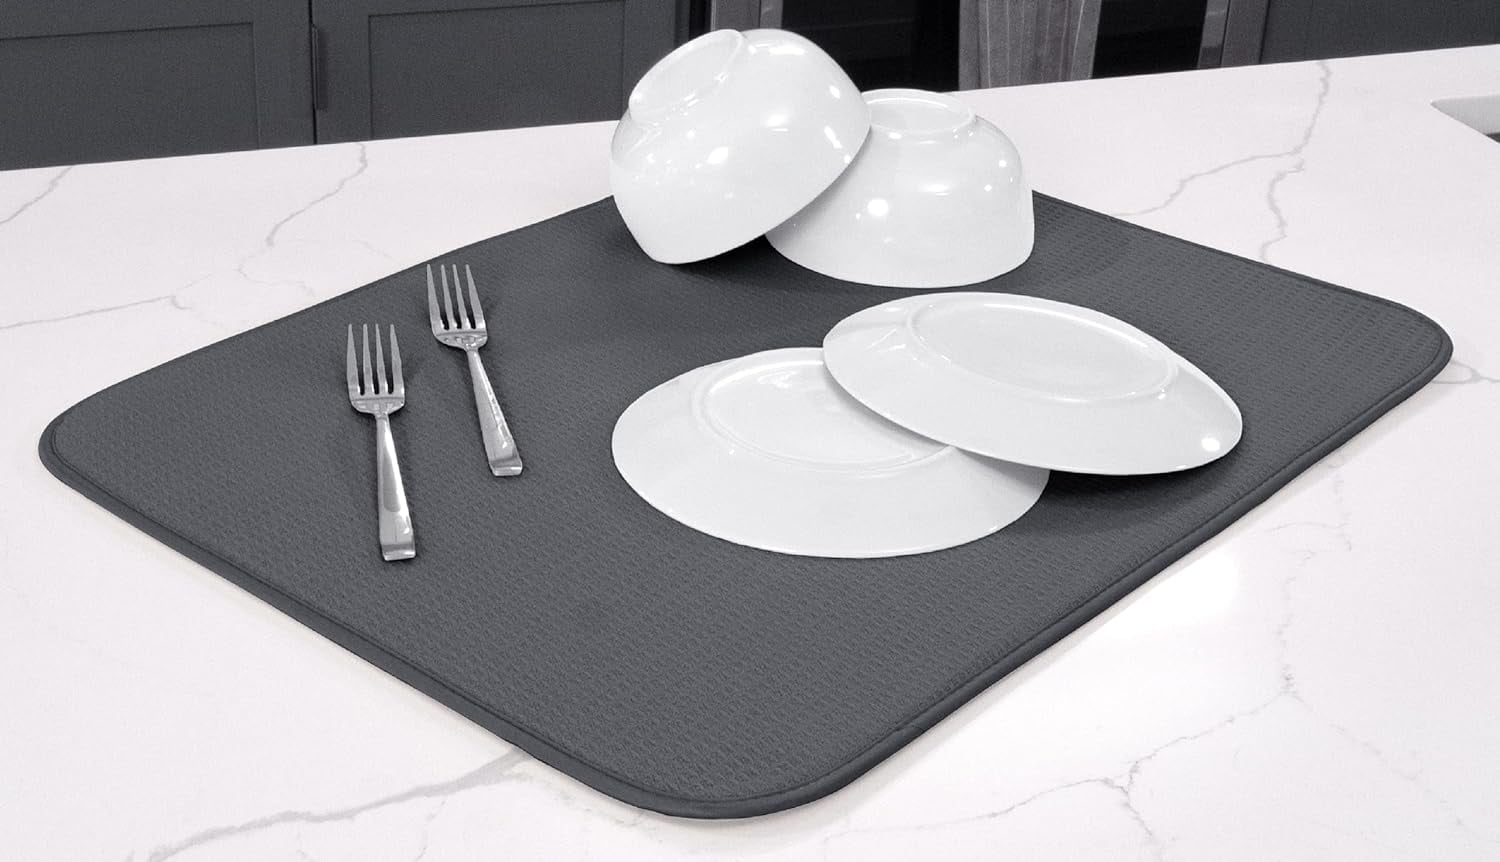 Schroeder & Tremayne Marble Dish Drying Mat Xl (1 unit), Delivery Near You